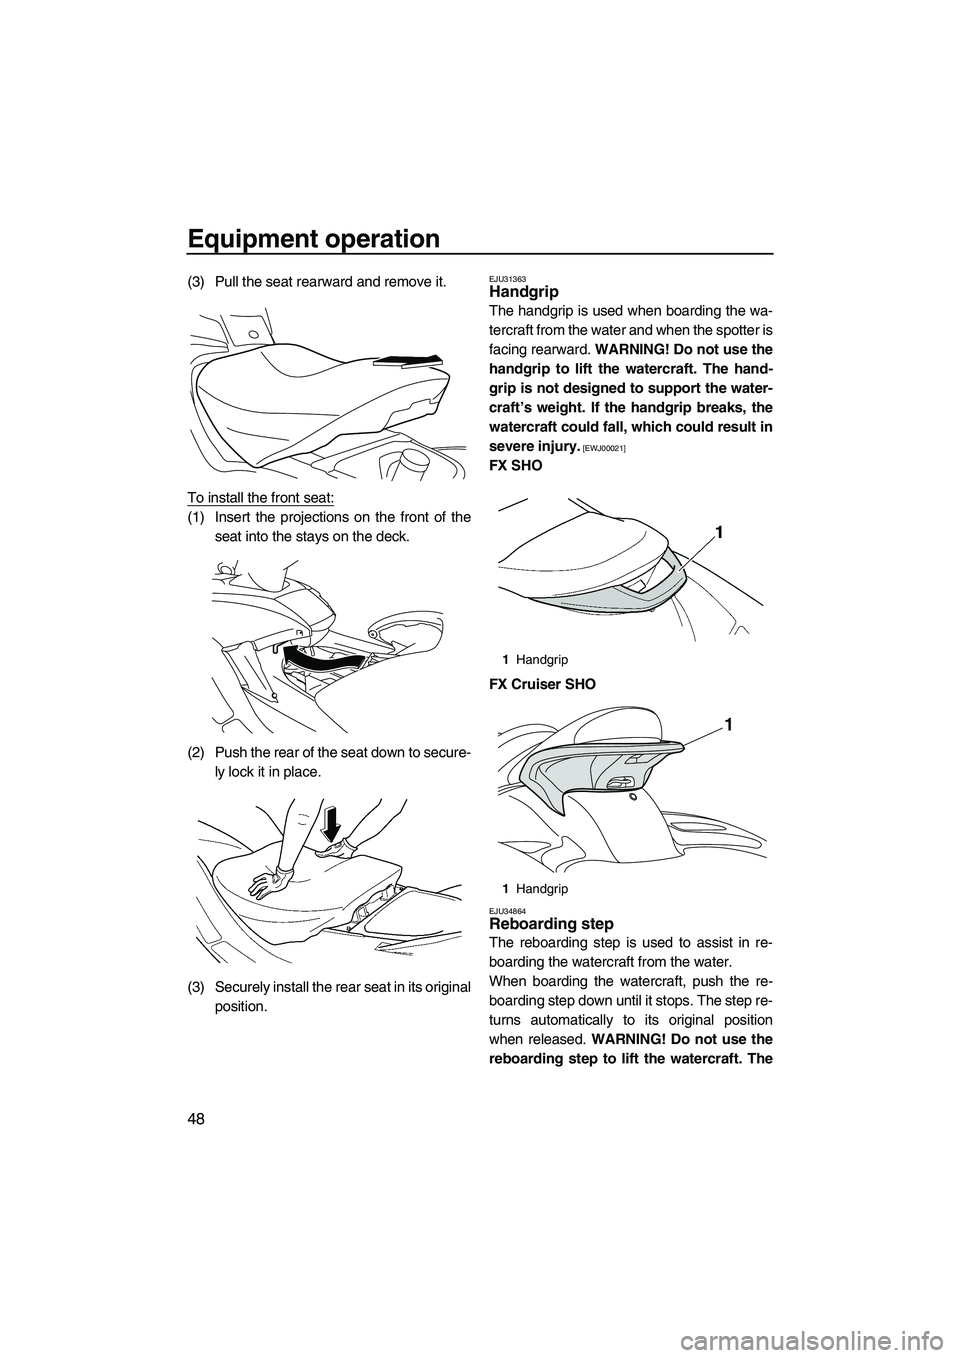 YAMAHA SVHO 2011  Owners Manual Equipment operation
48
(3) Pull the seat rearward and remove it.
To install the front seat:
(1) Insert the projections on the front of the
seat into the stays on the deck.
(2) Push the rear of the sea